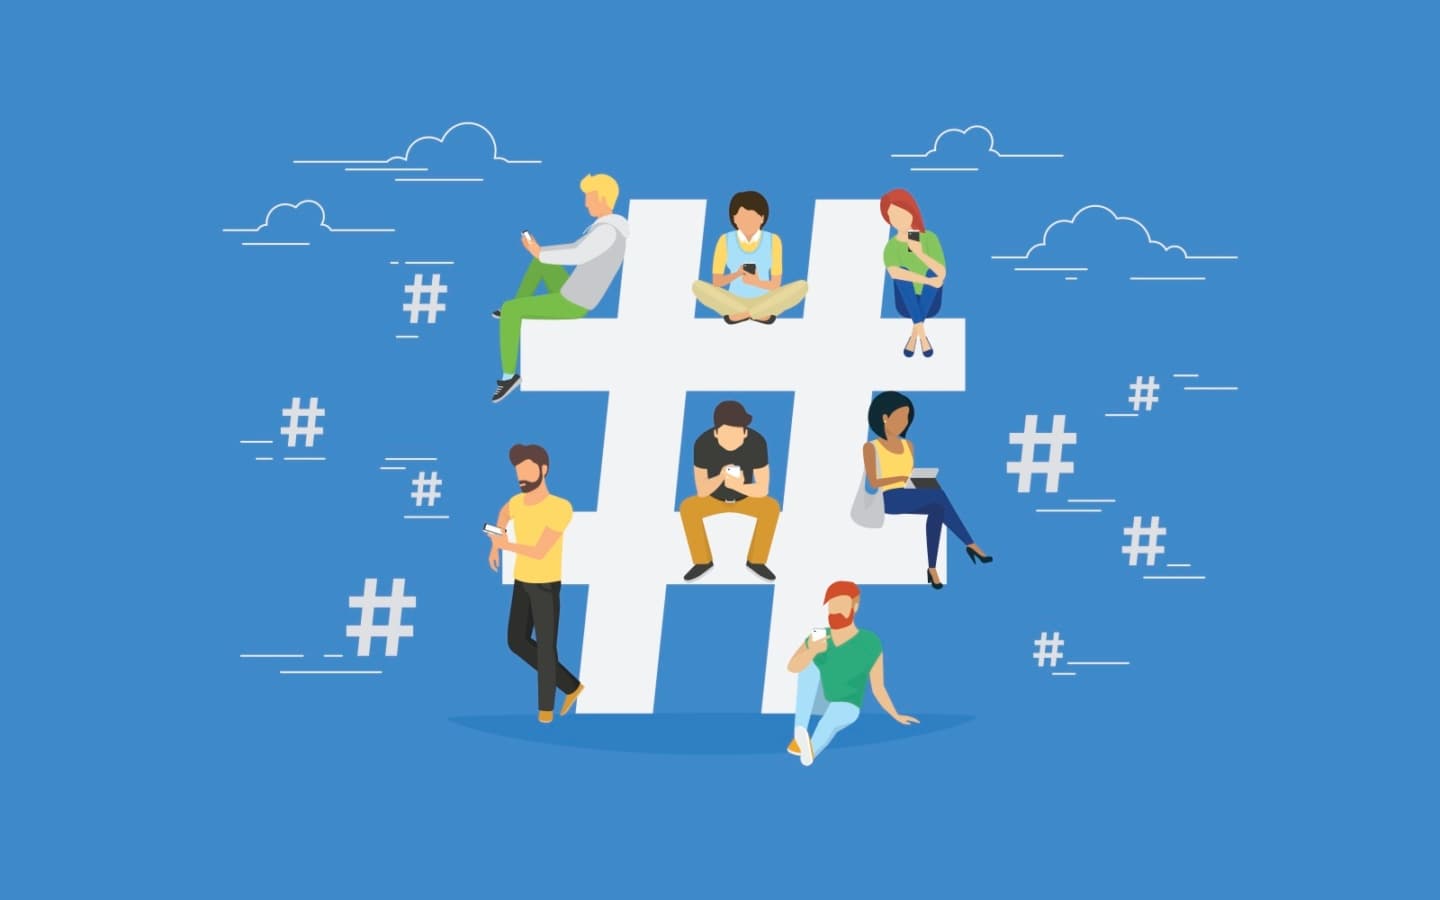 Twitter Voice Tweets: Playful image of twitter networking